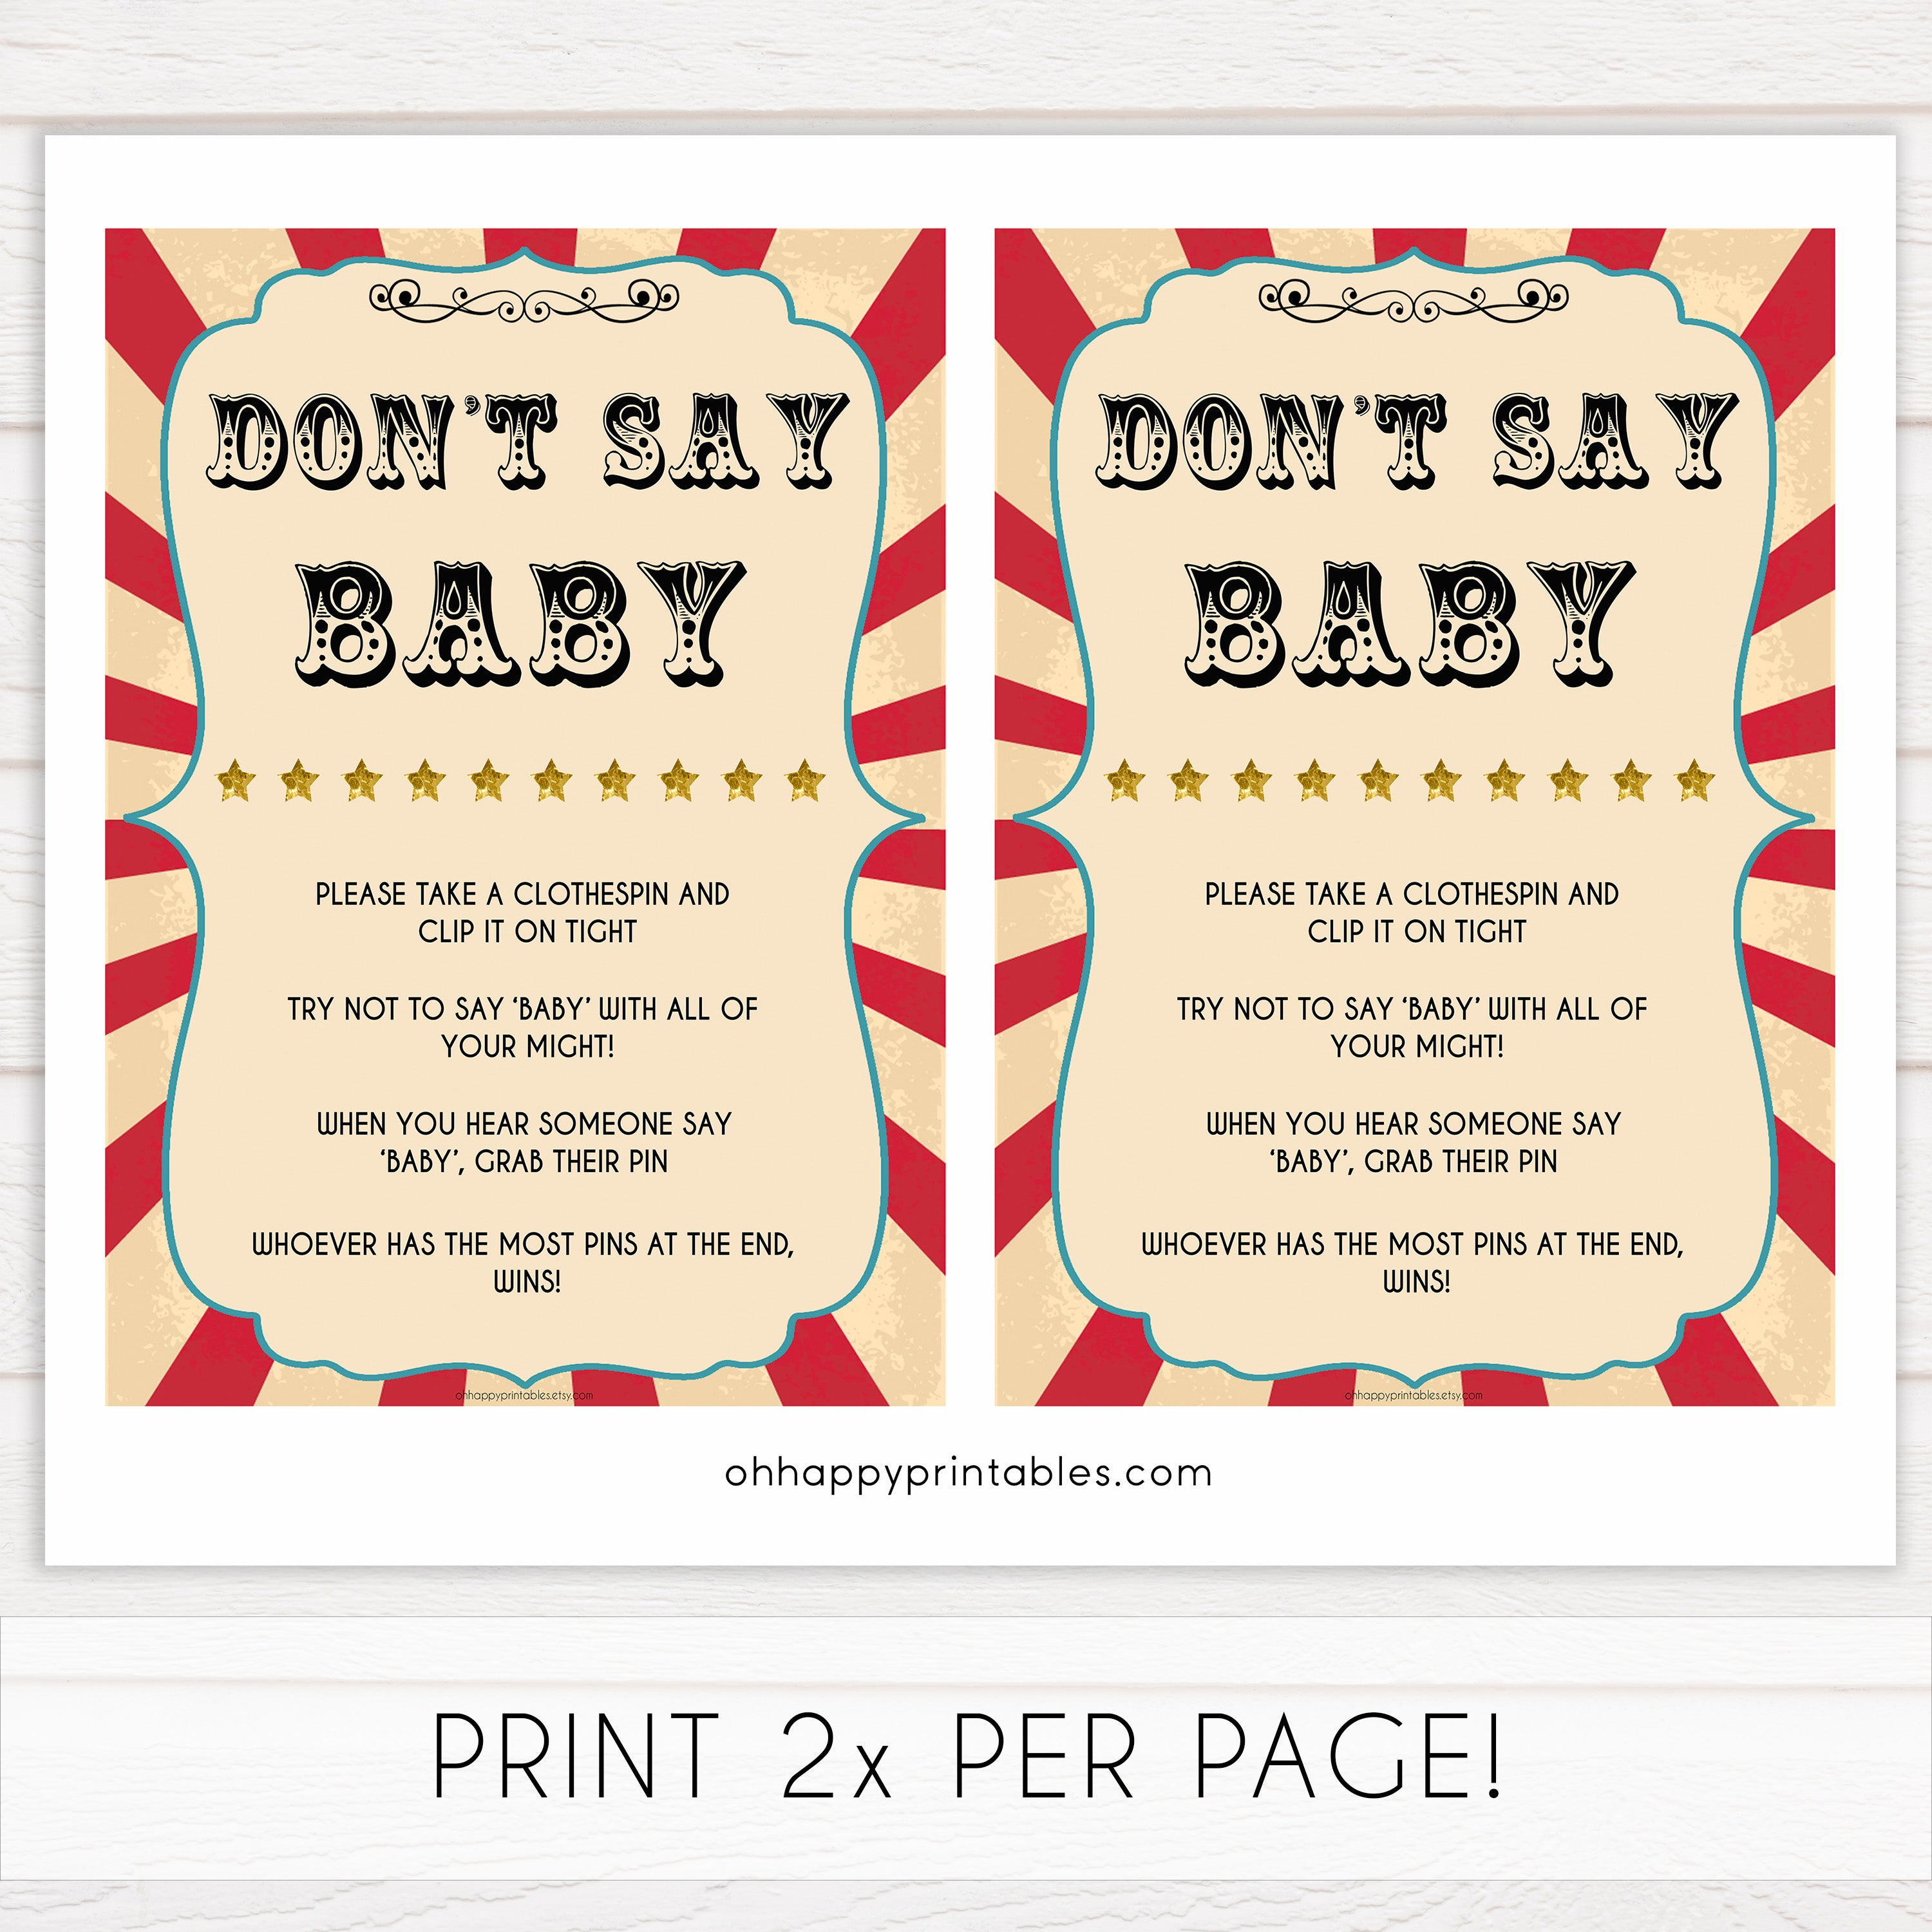 Circus dont say baby baby shower games, circus baby games, carnival baby games, printable baby games, fun baby games, popular baby games, carnival baby shower, carnival theme